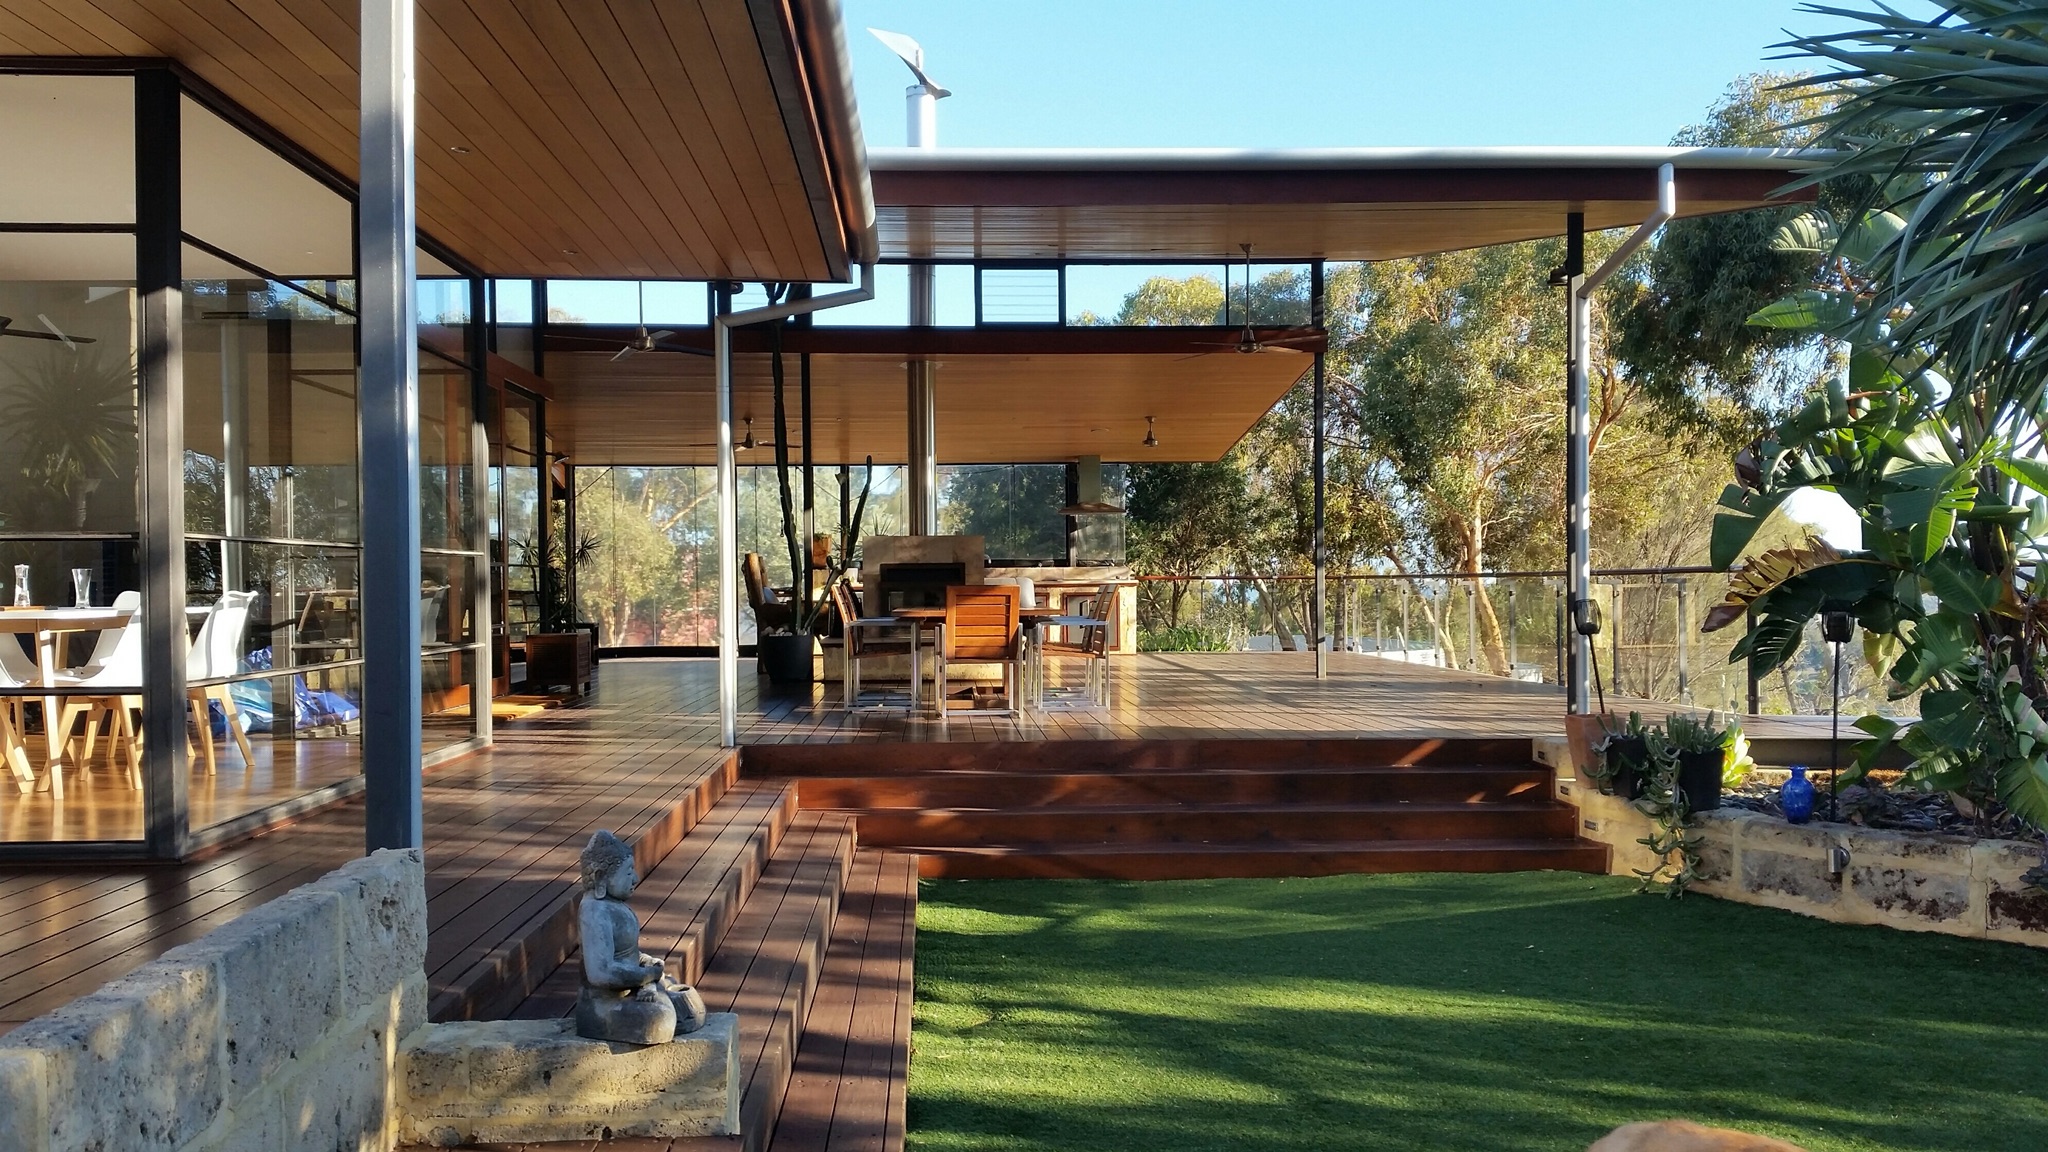 Awnings, Retractable Roof Systems and External Blinds — Awning Worx